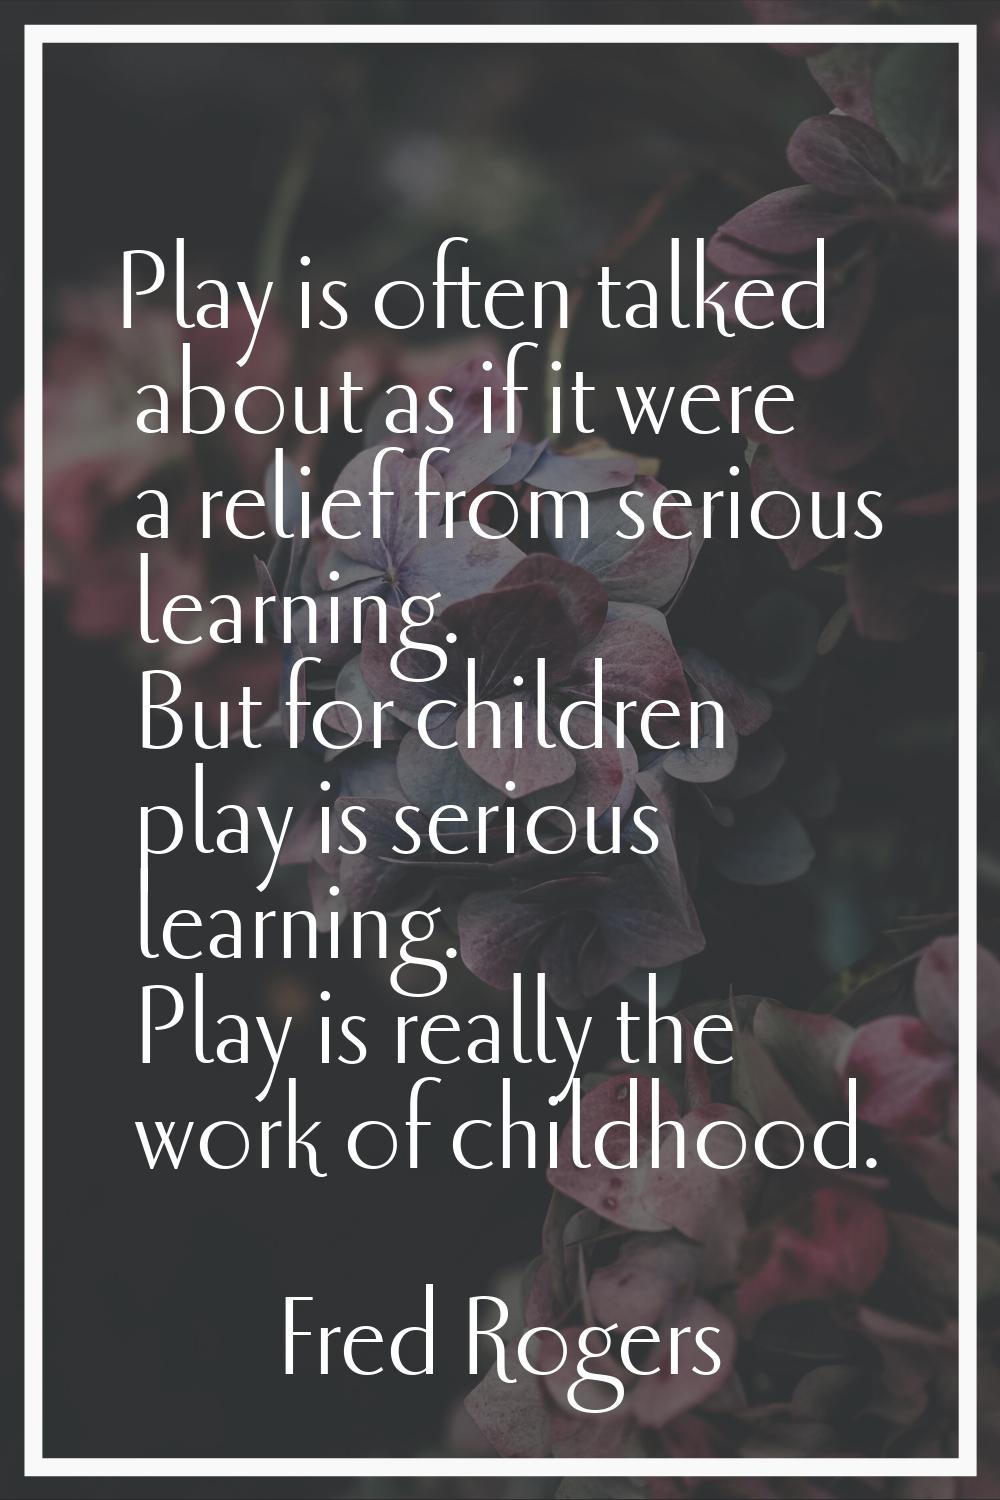 Play is often talked about as if it were a relief from serious learning. But for children play is s